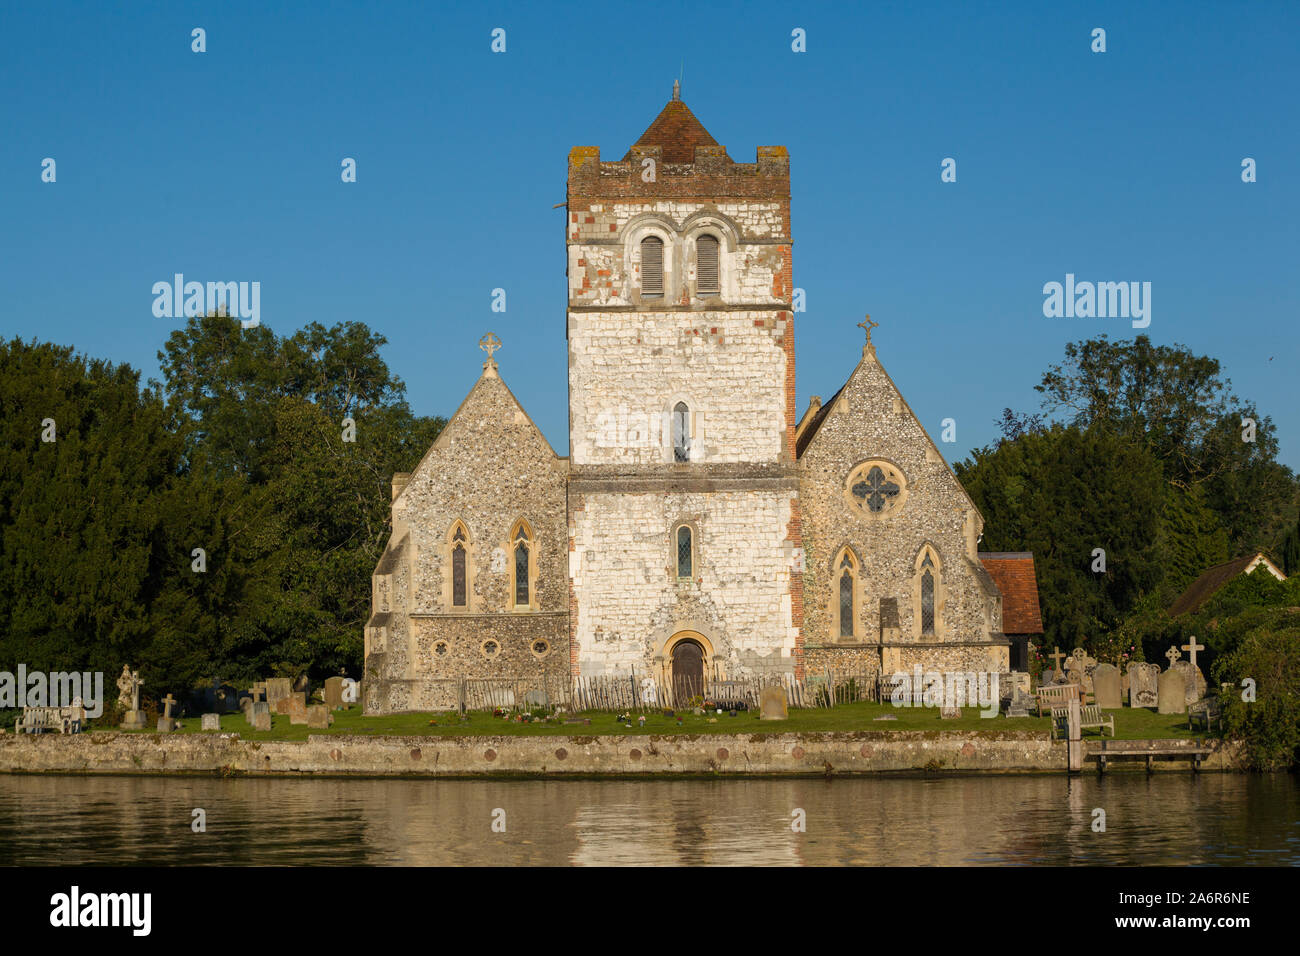 All Saints Church, Bisham, Buckinghamshire in the evening light reflected in the River Thames, Stock Photo